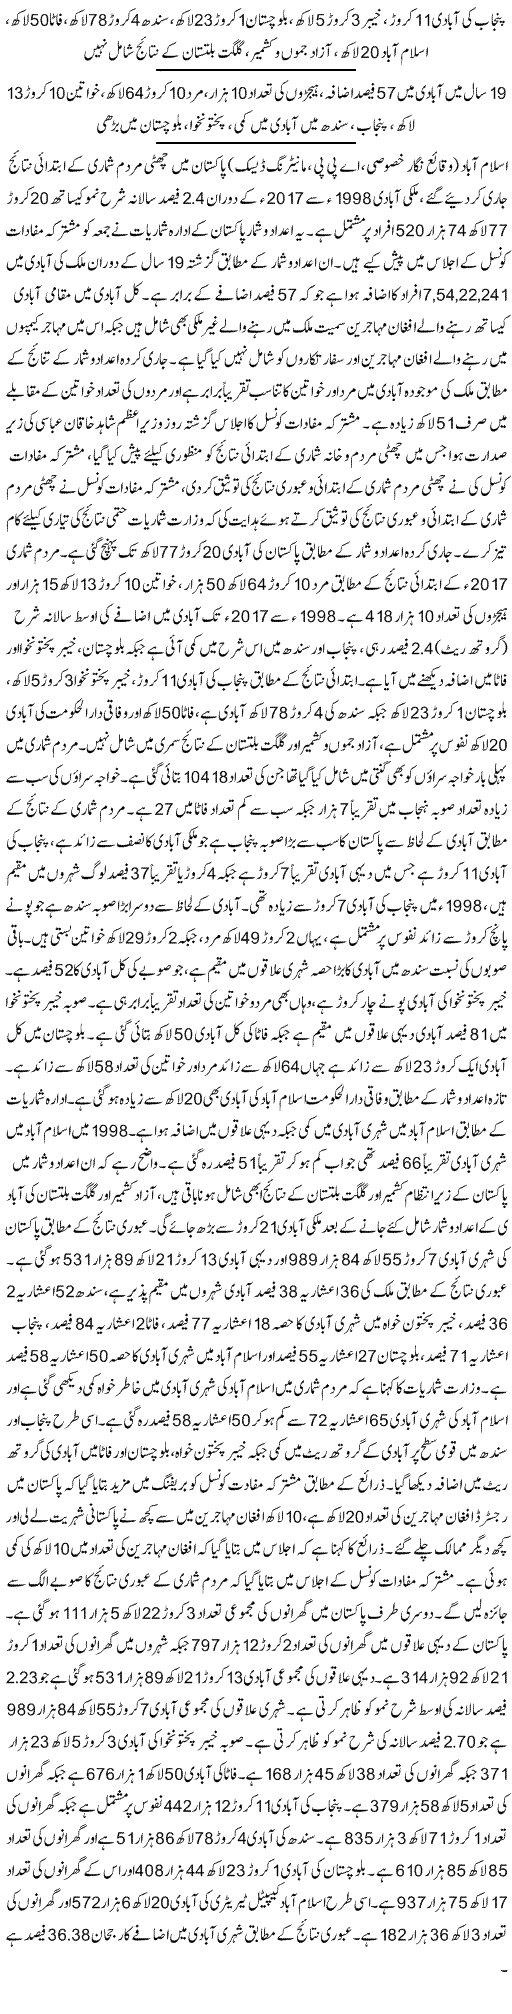 Results Of 6th Pakistan Population Census 2017